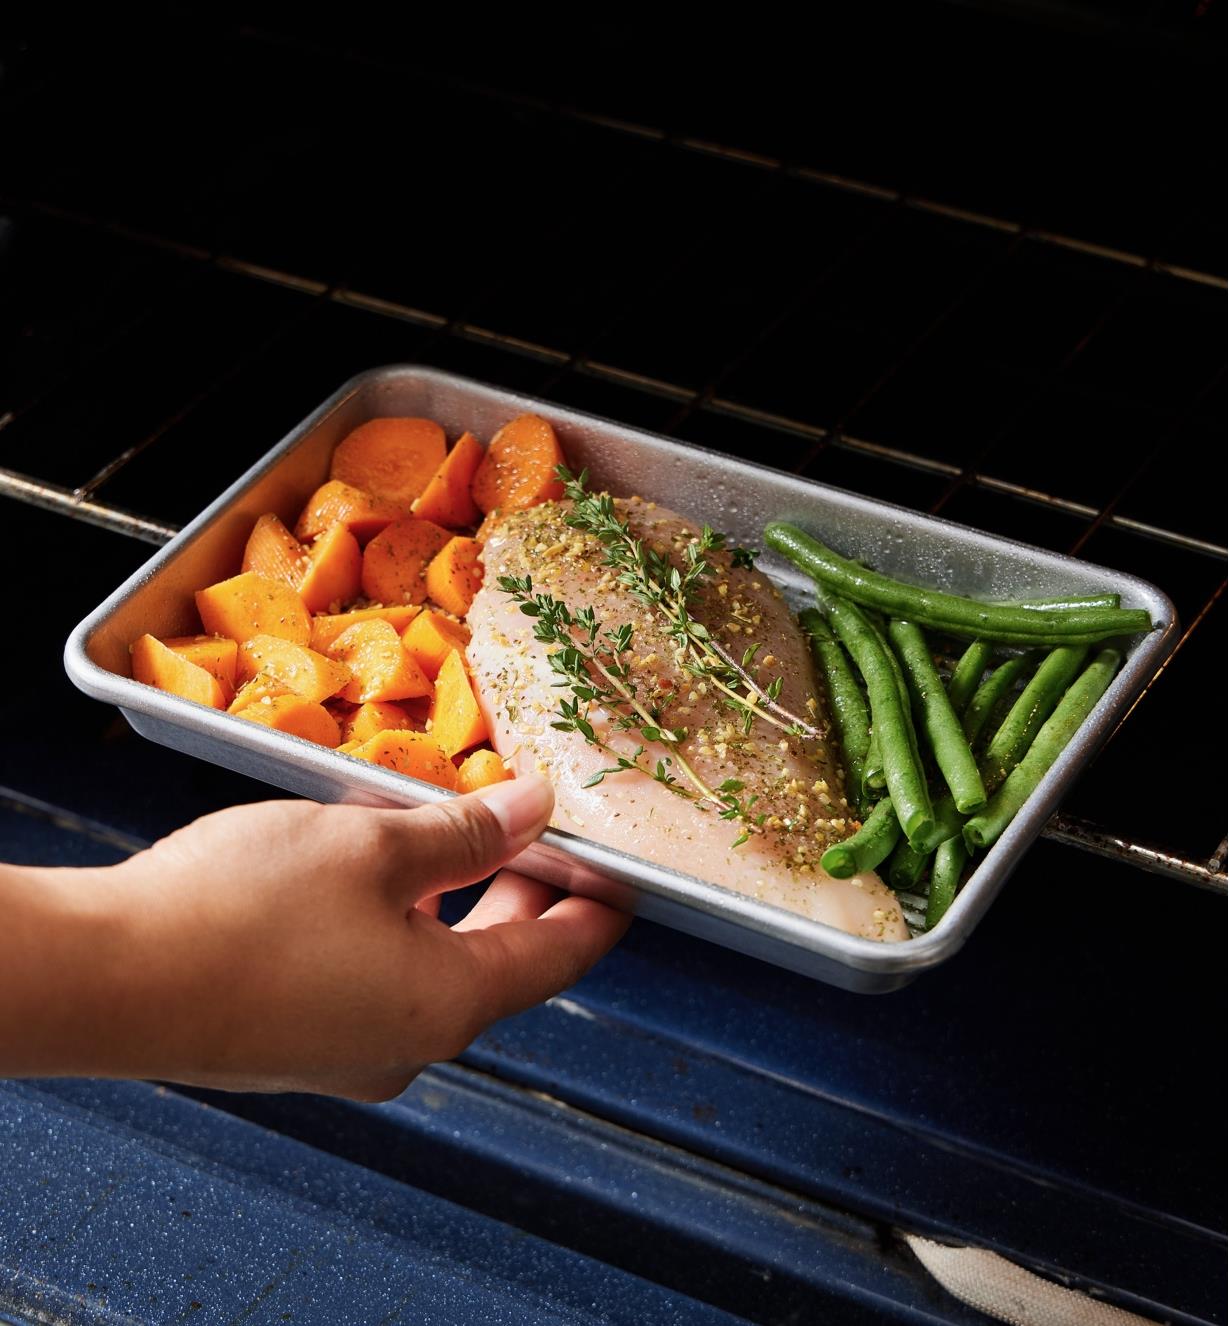 Carrots, asparagus and chicken being placed in an oven on an eighth-sheet baking pan